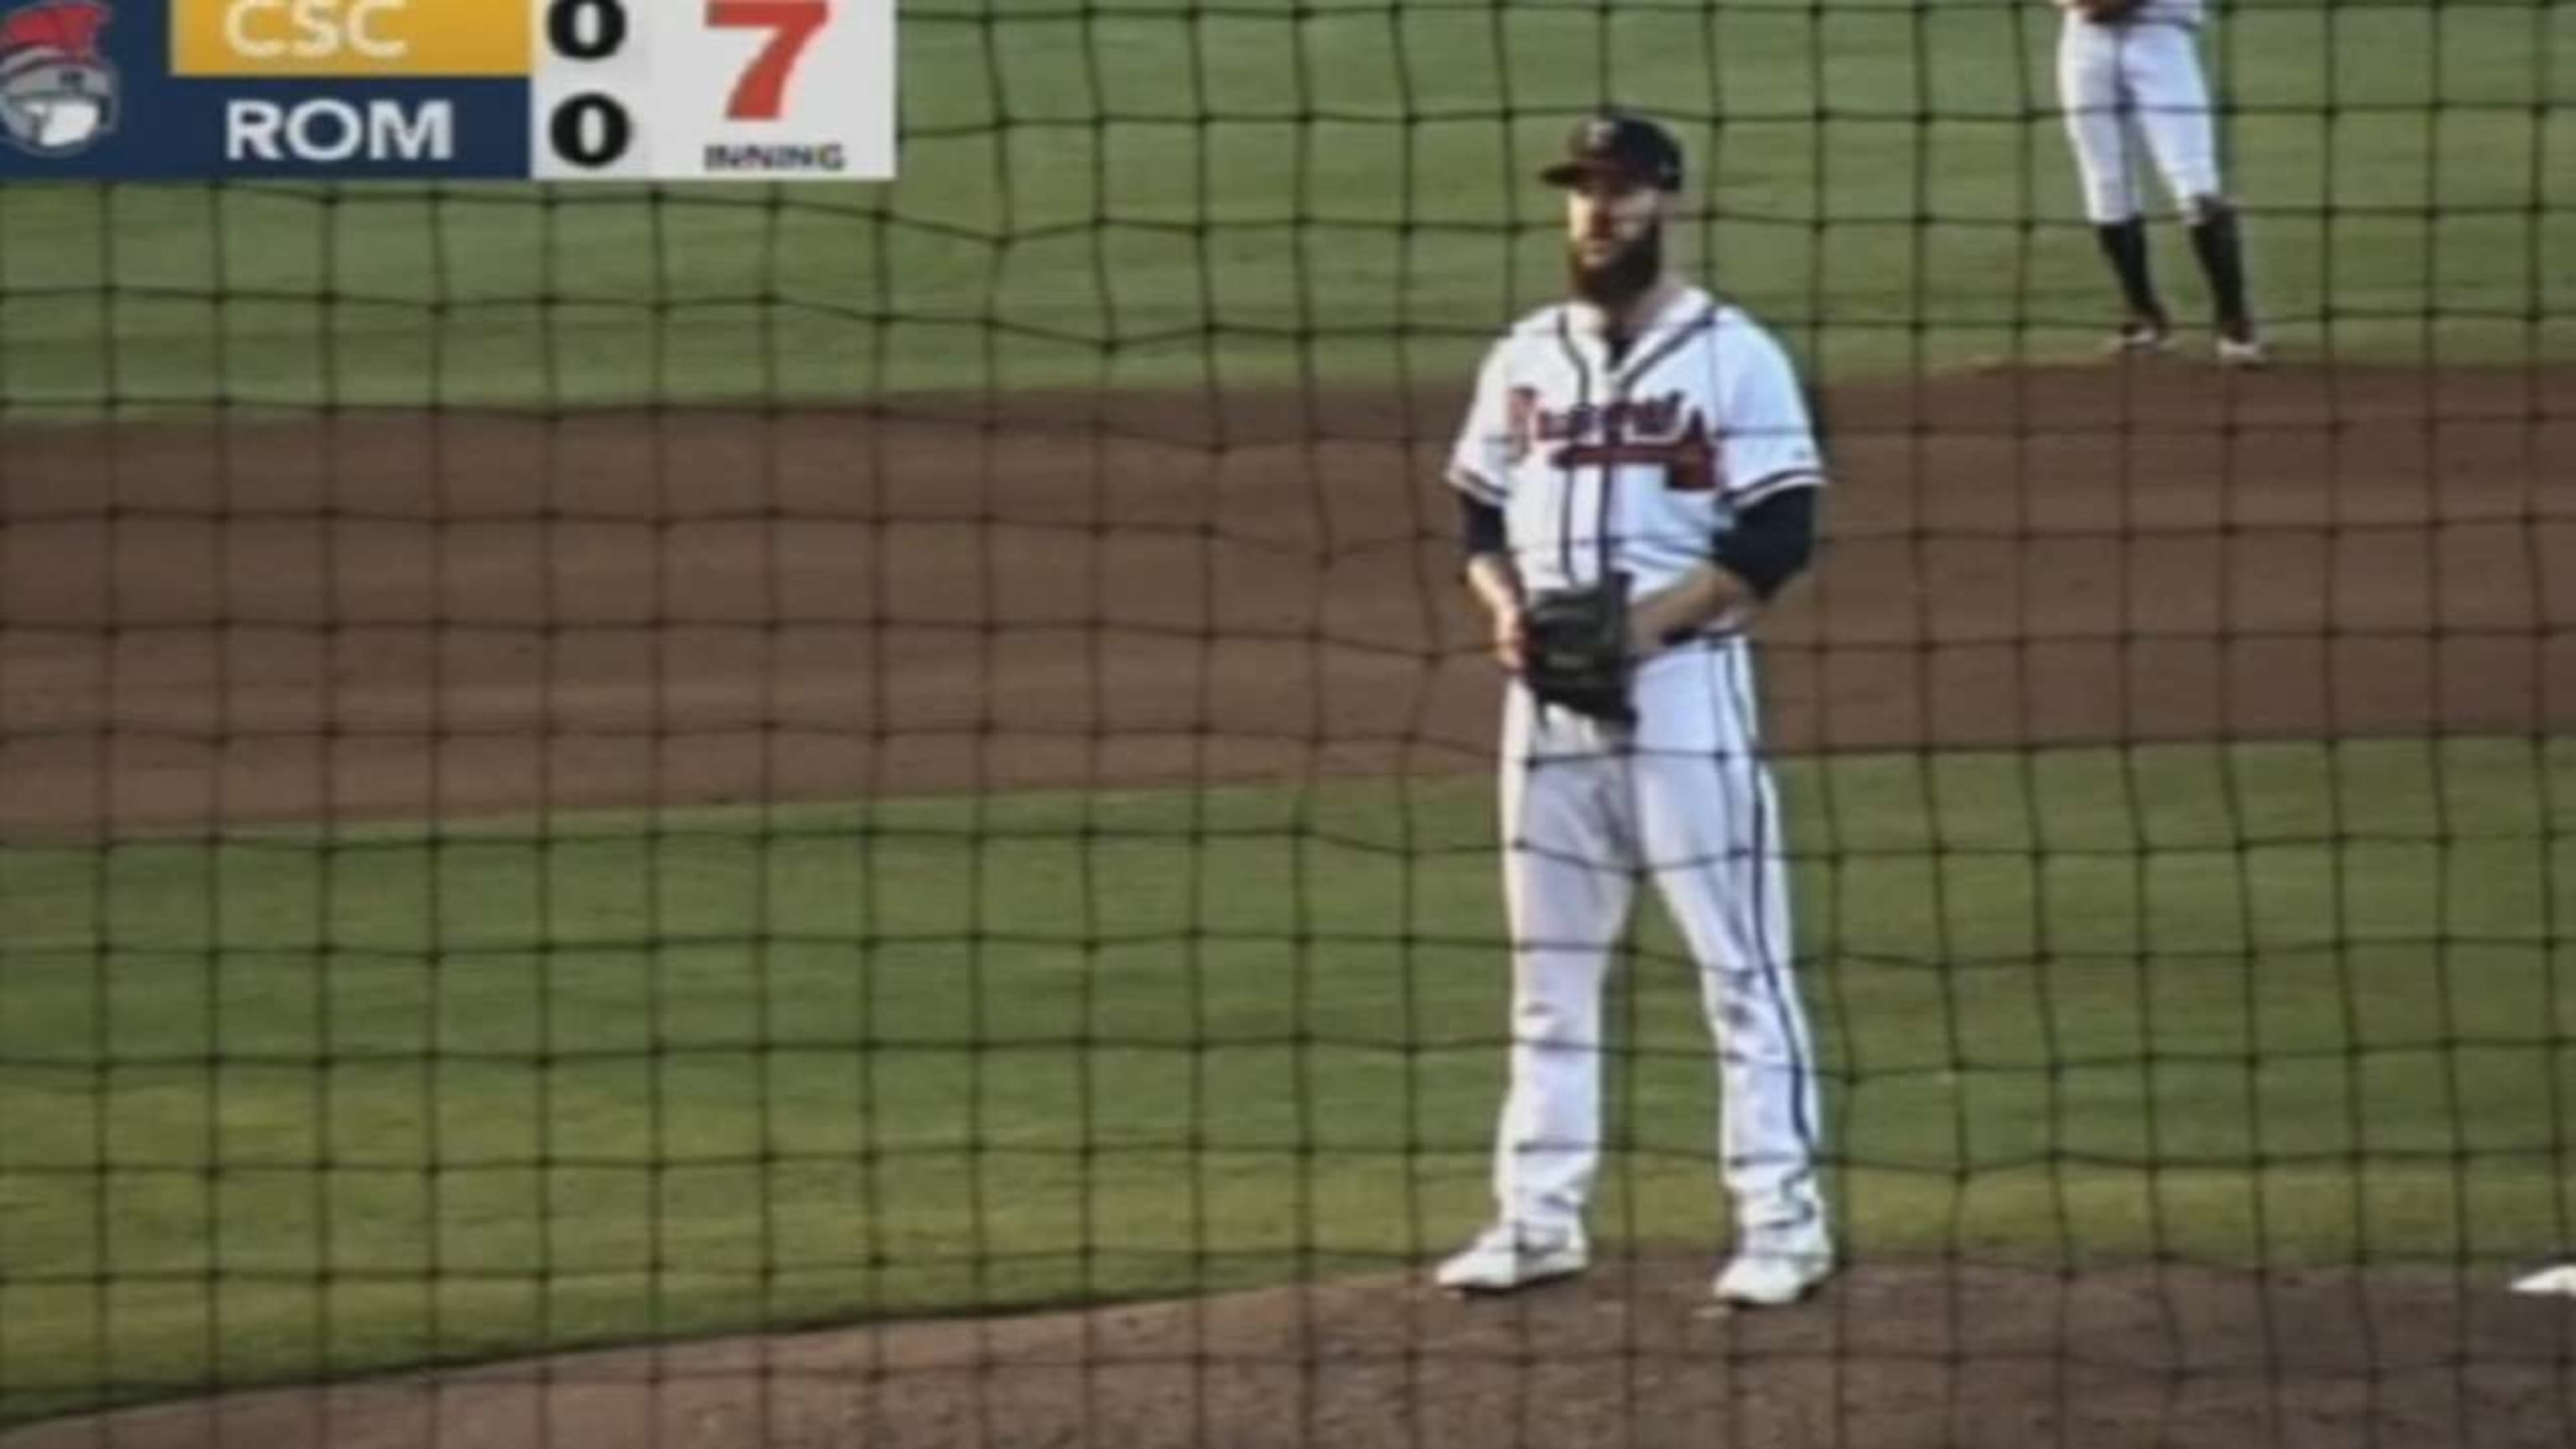 Dallas Keuchel's first outing in the Braves organization was